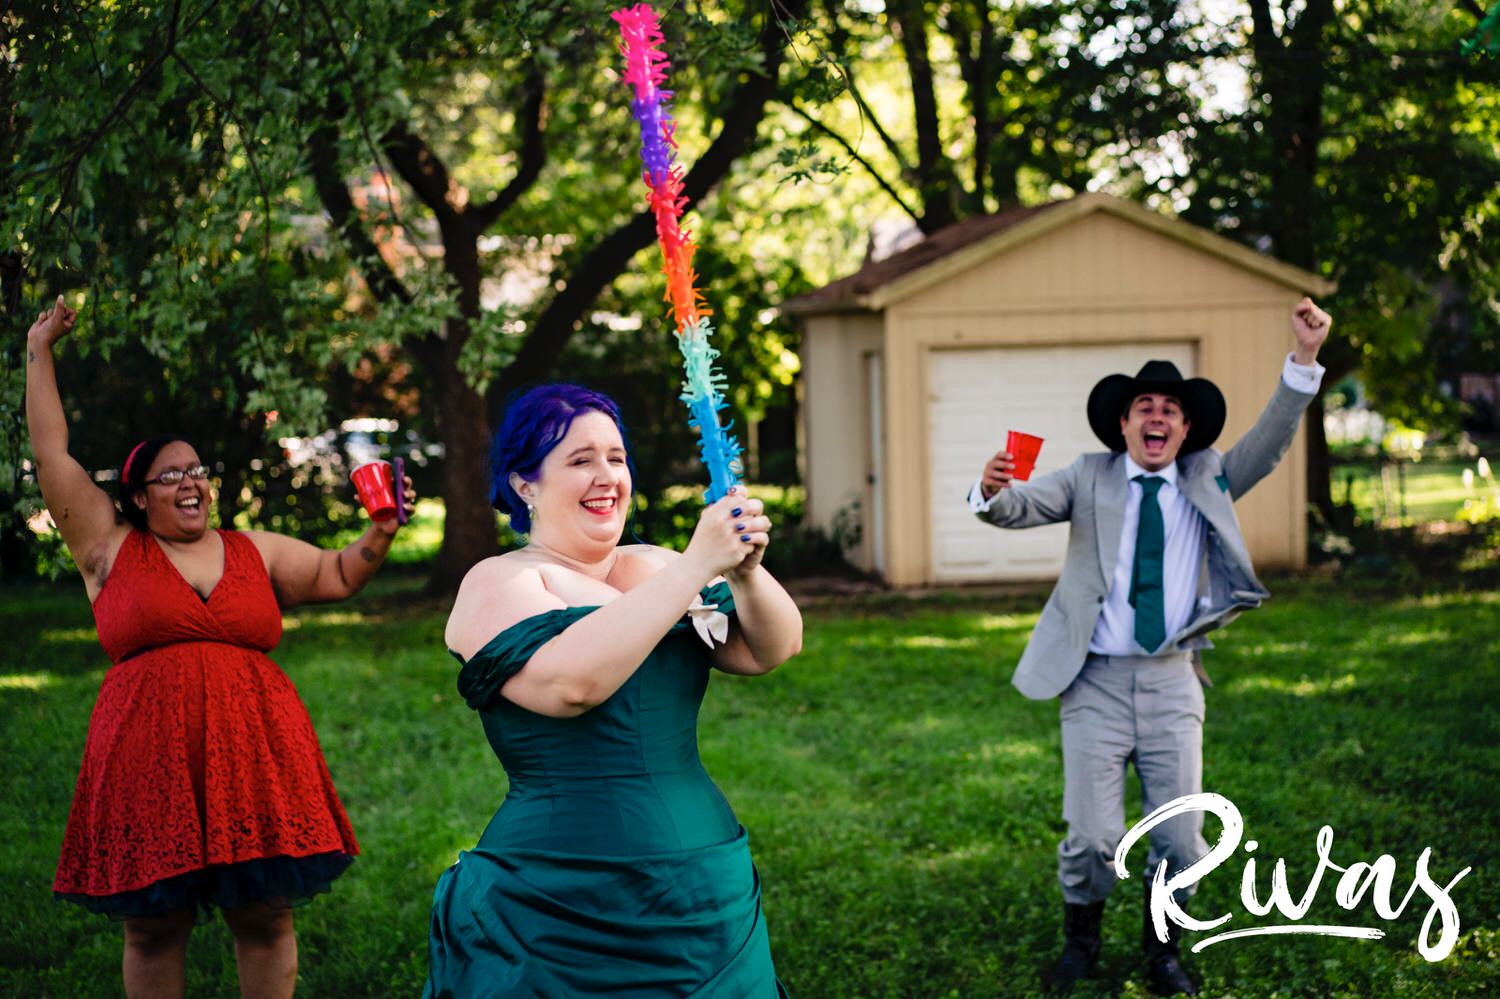 A candid picture of a bride in a jade wedding gown holding a colorful stick up in triump as her groom and friend cheer on behind her after she's blown-open a pinata during her intimate backyard wedding ceremony. 